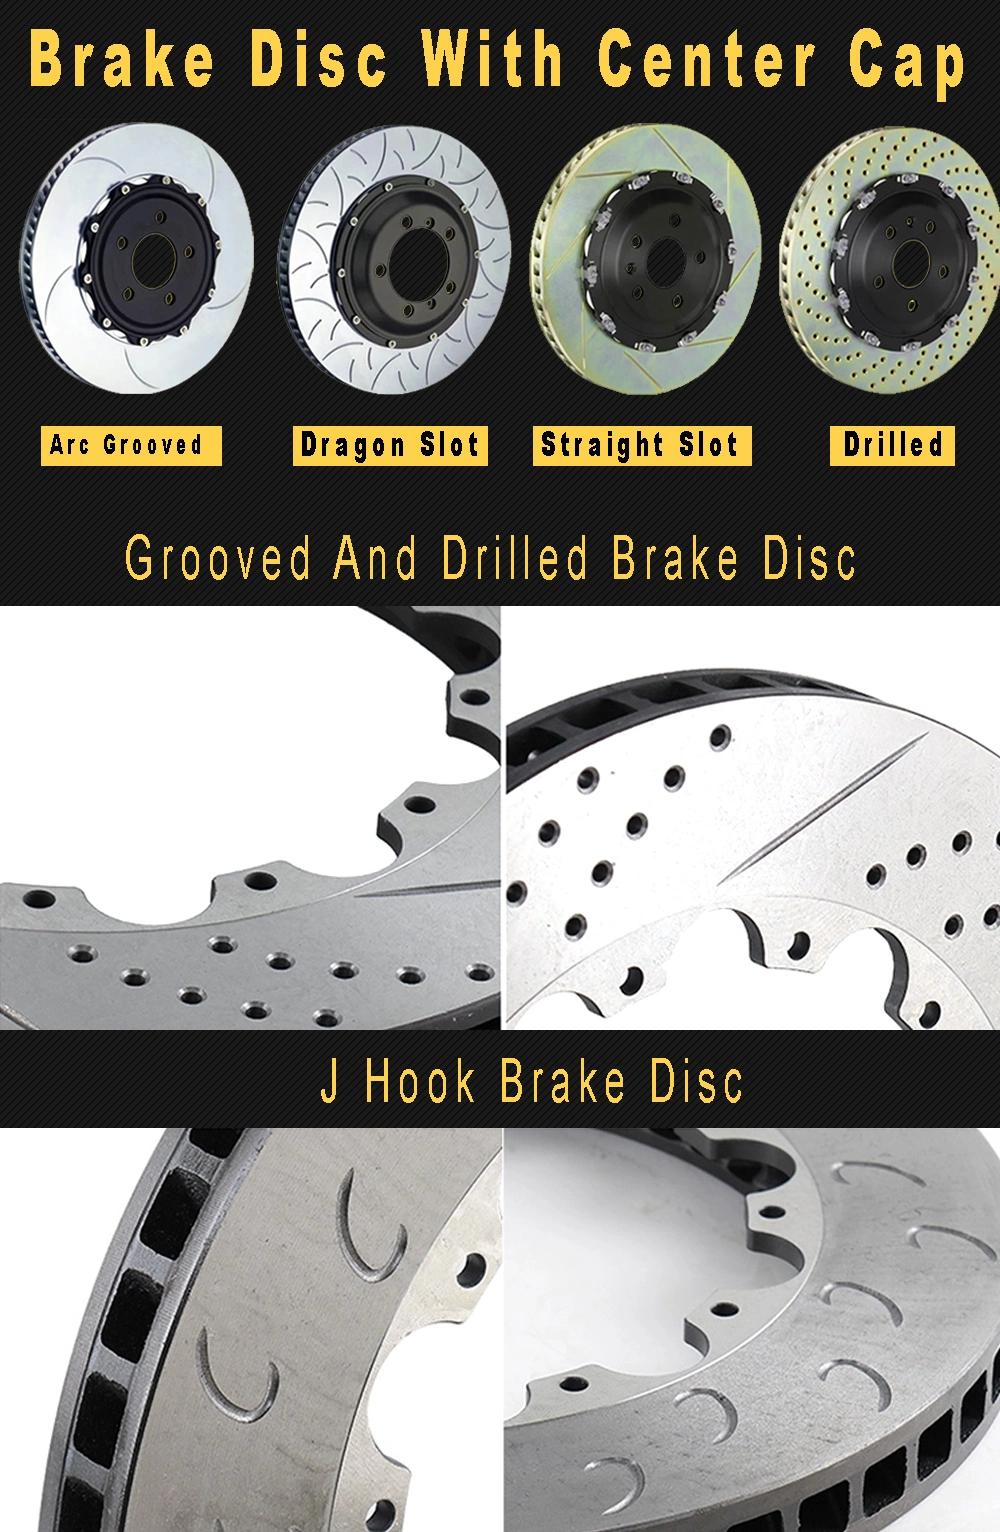 Reliable Truck Parts Rear Axle Solid Brake Disc/Plate Cast Iron 45251sm4g02/45251sn7e50/Gbd90837 for Honda